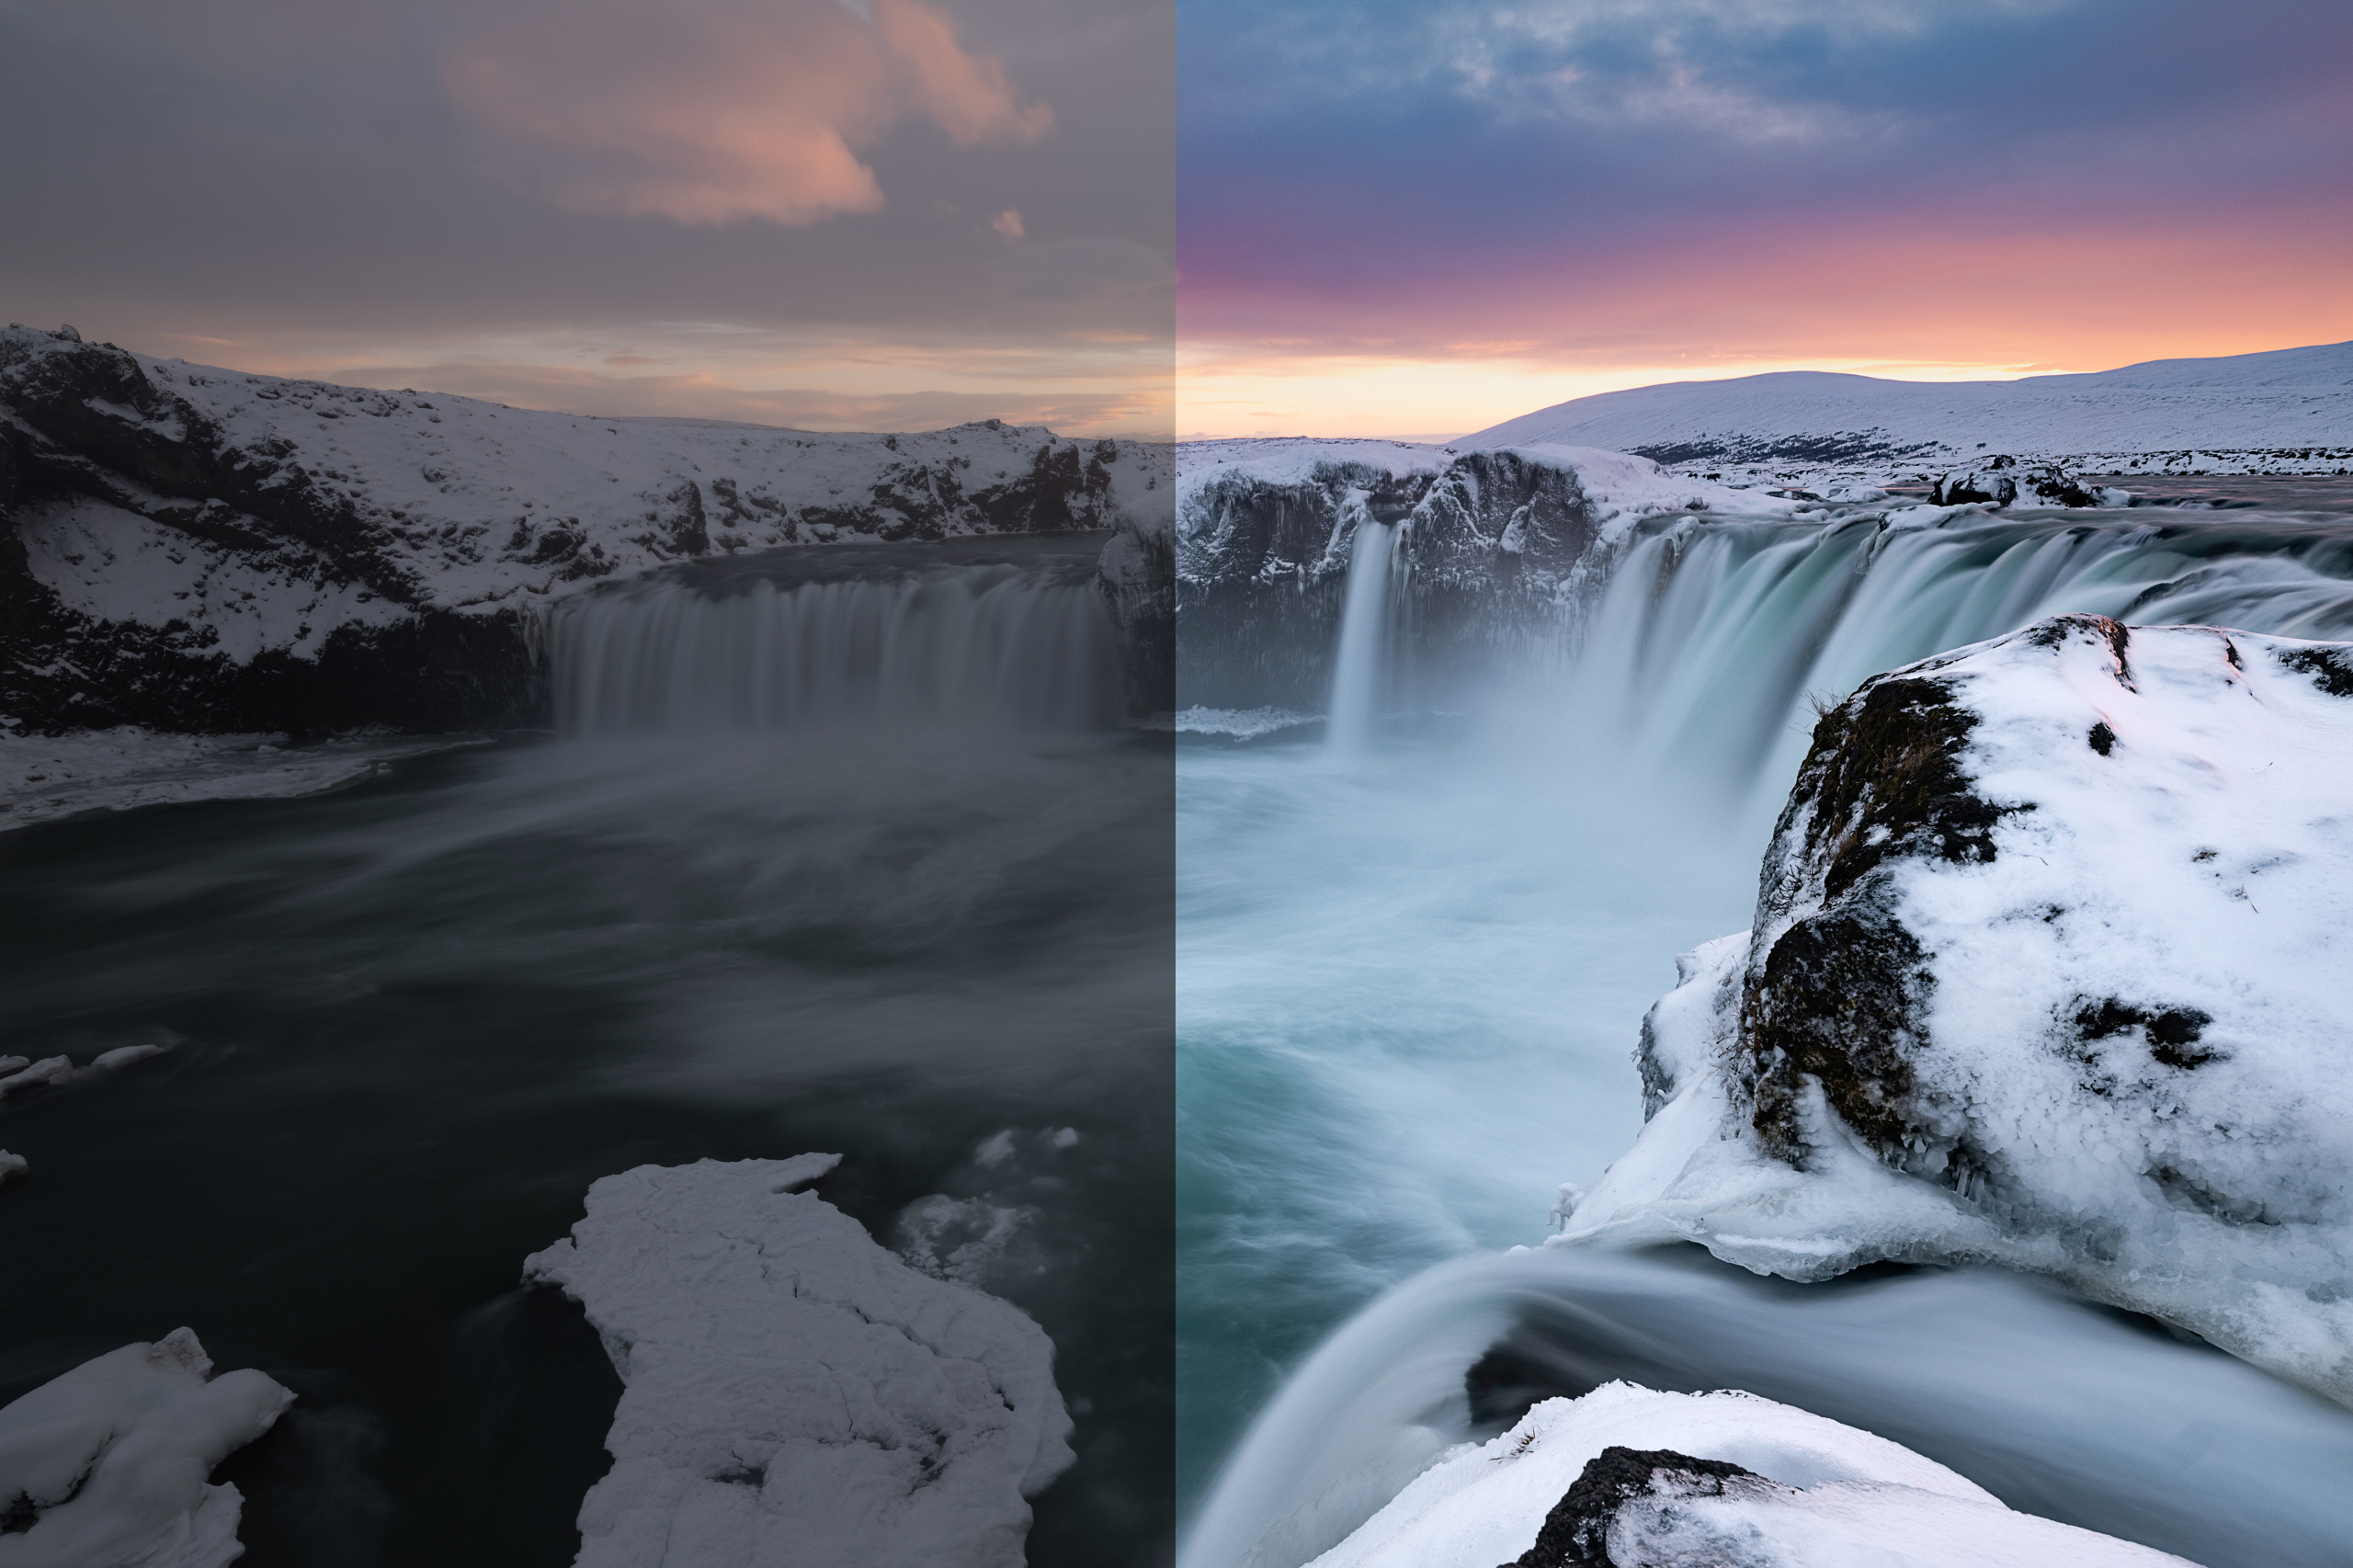 photoshop before and after landscape